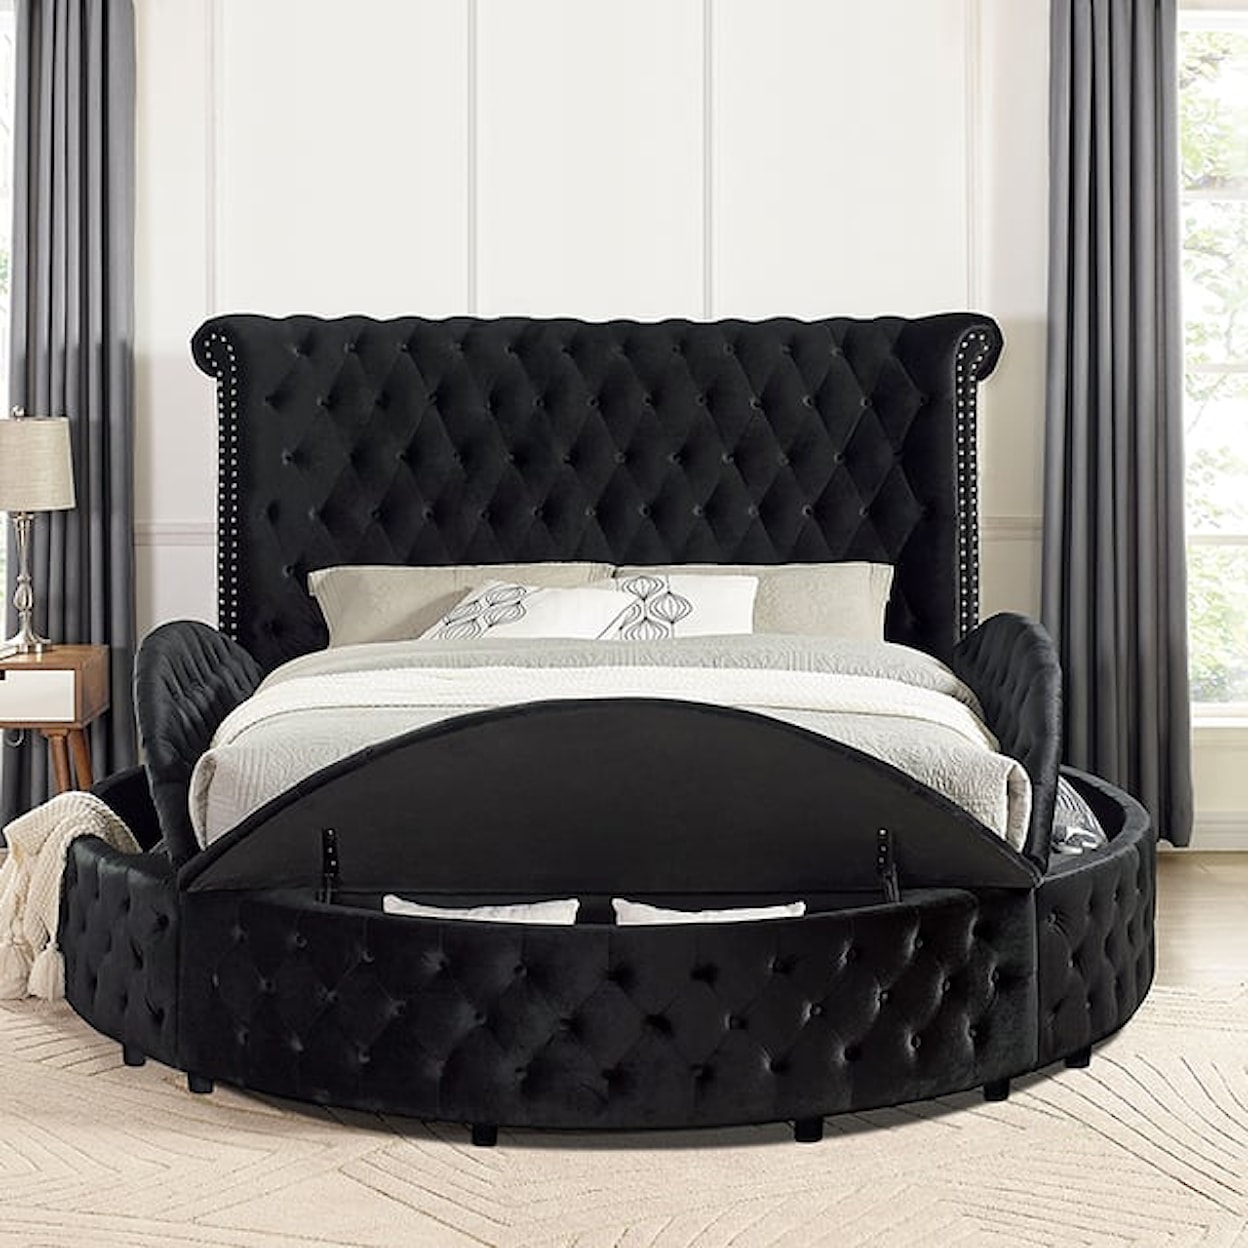 Furniture of America - FOA Sansom Cali. King Upholstered Round Bed